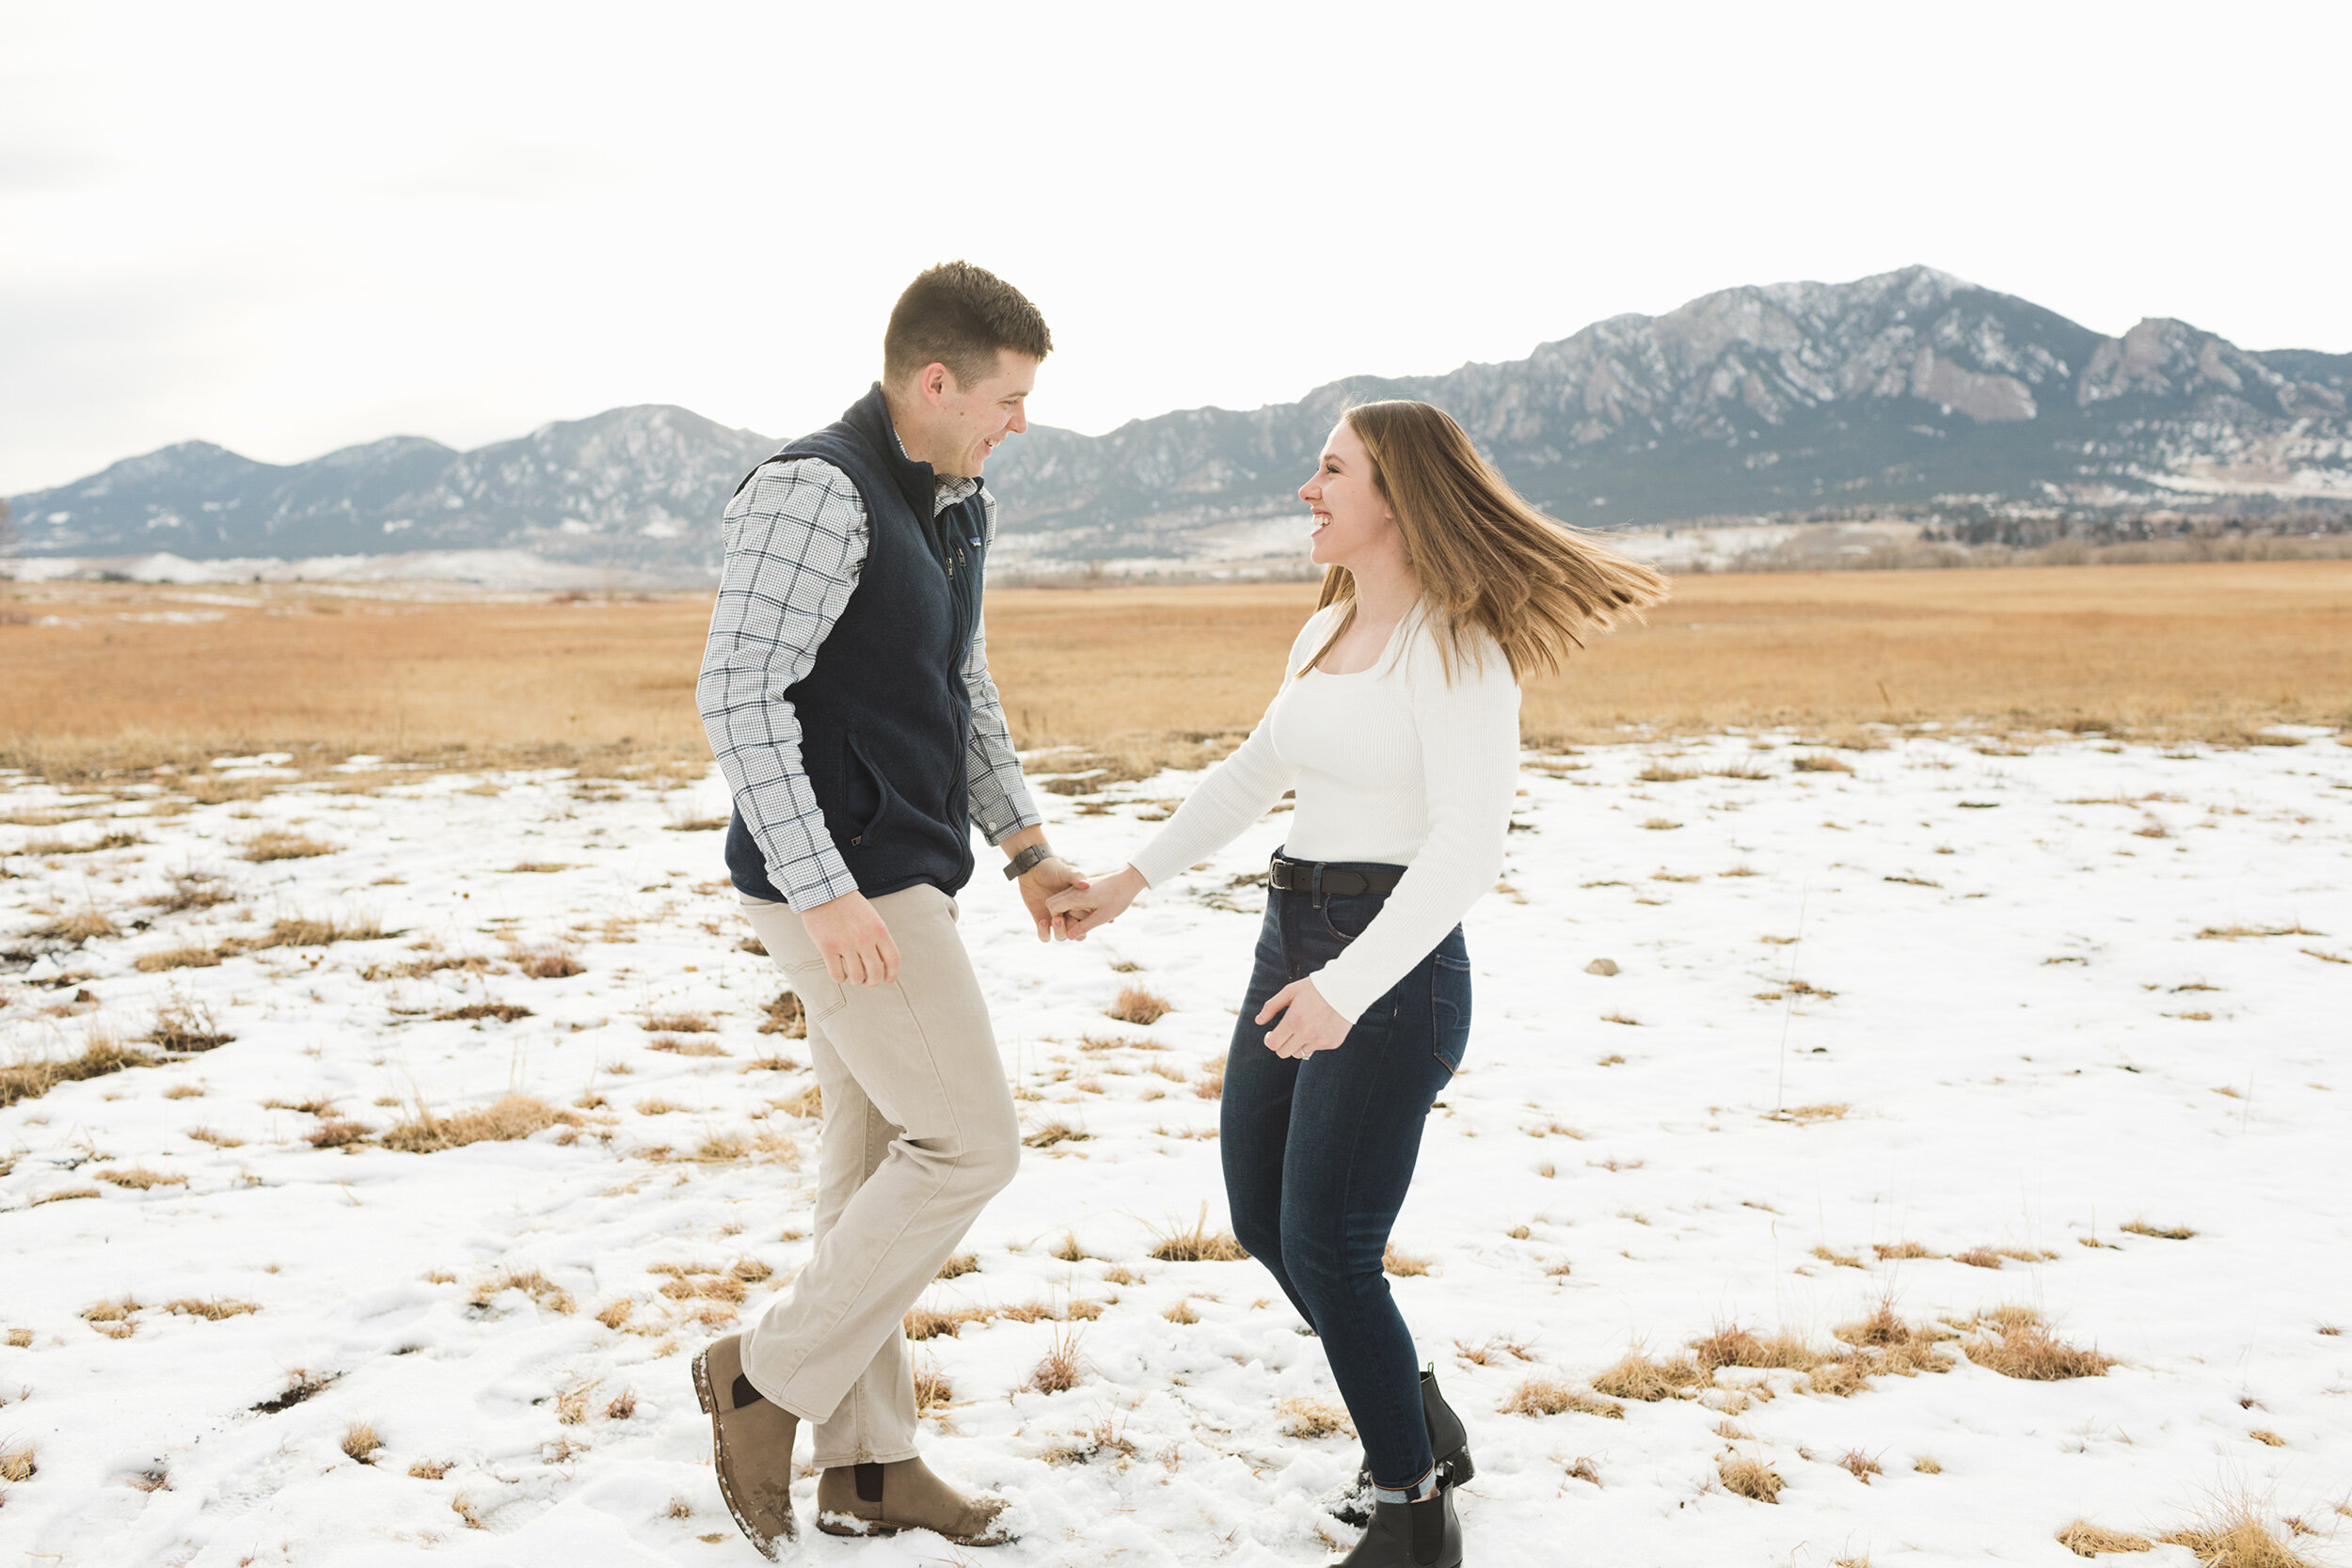 colorado-engagement-photos-in-the-snowy-mountains-05.jpg